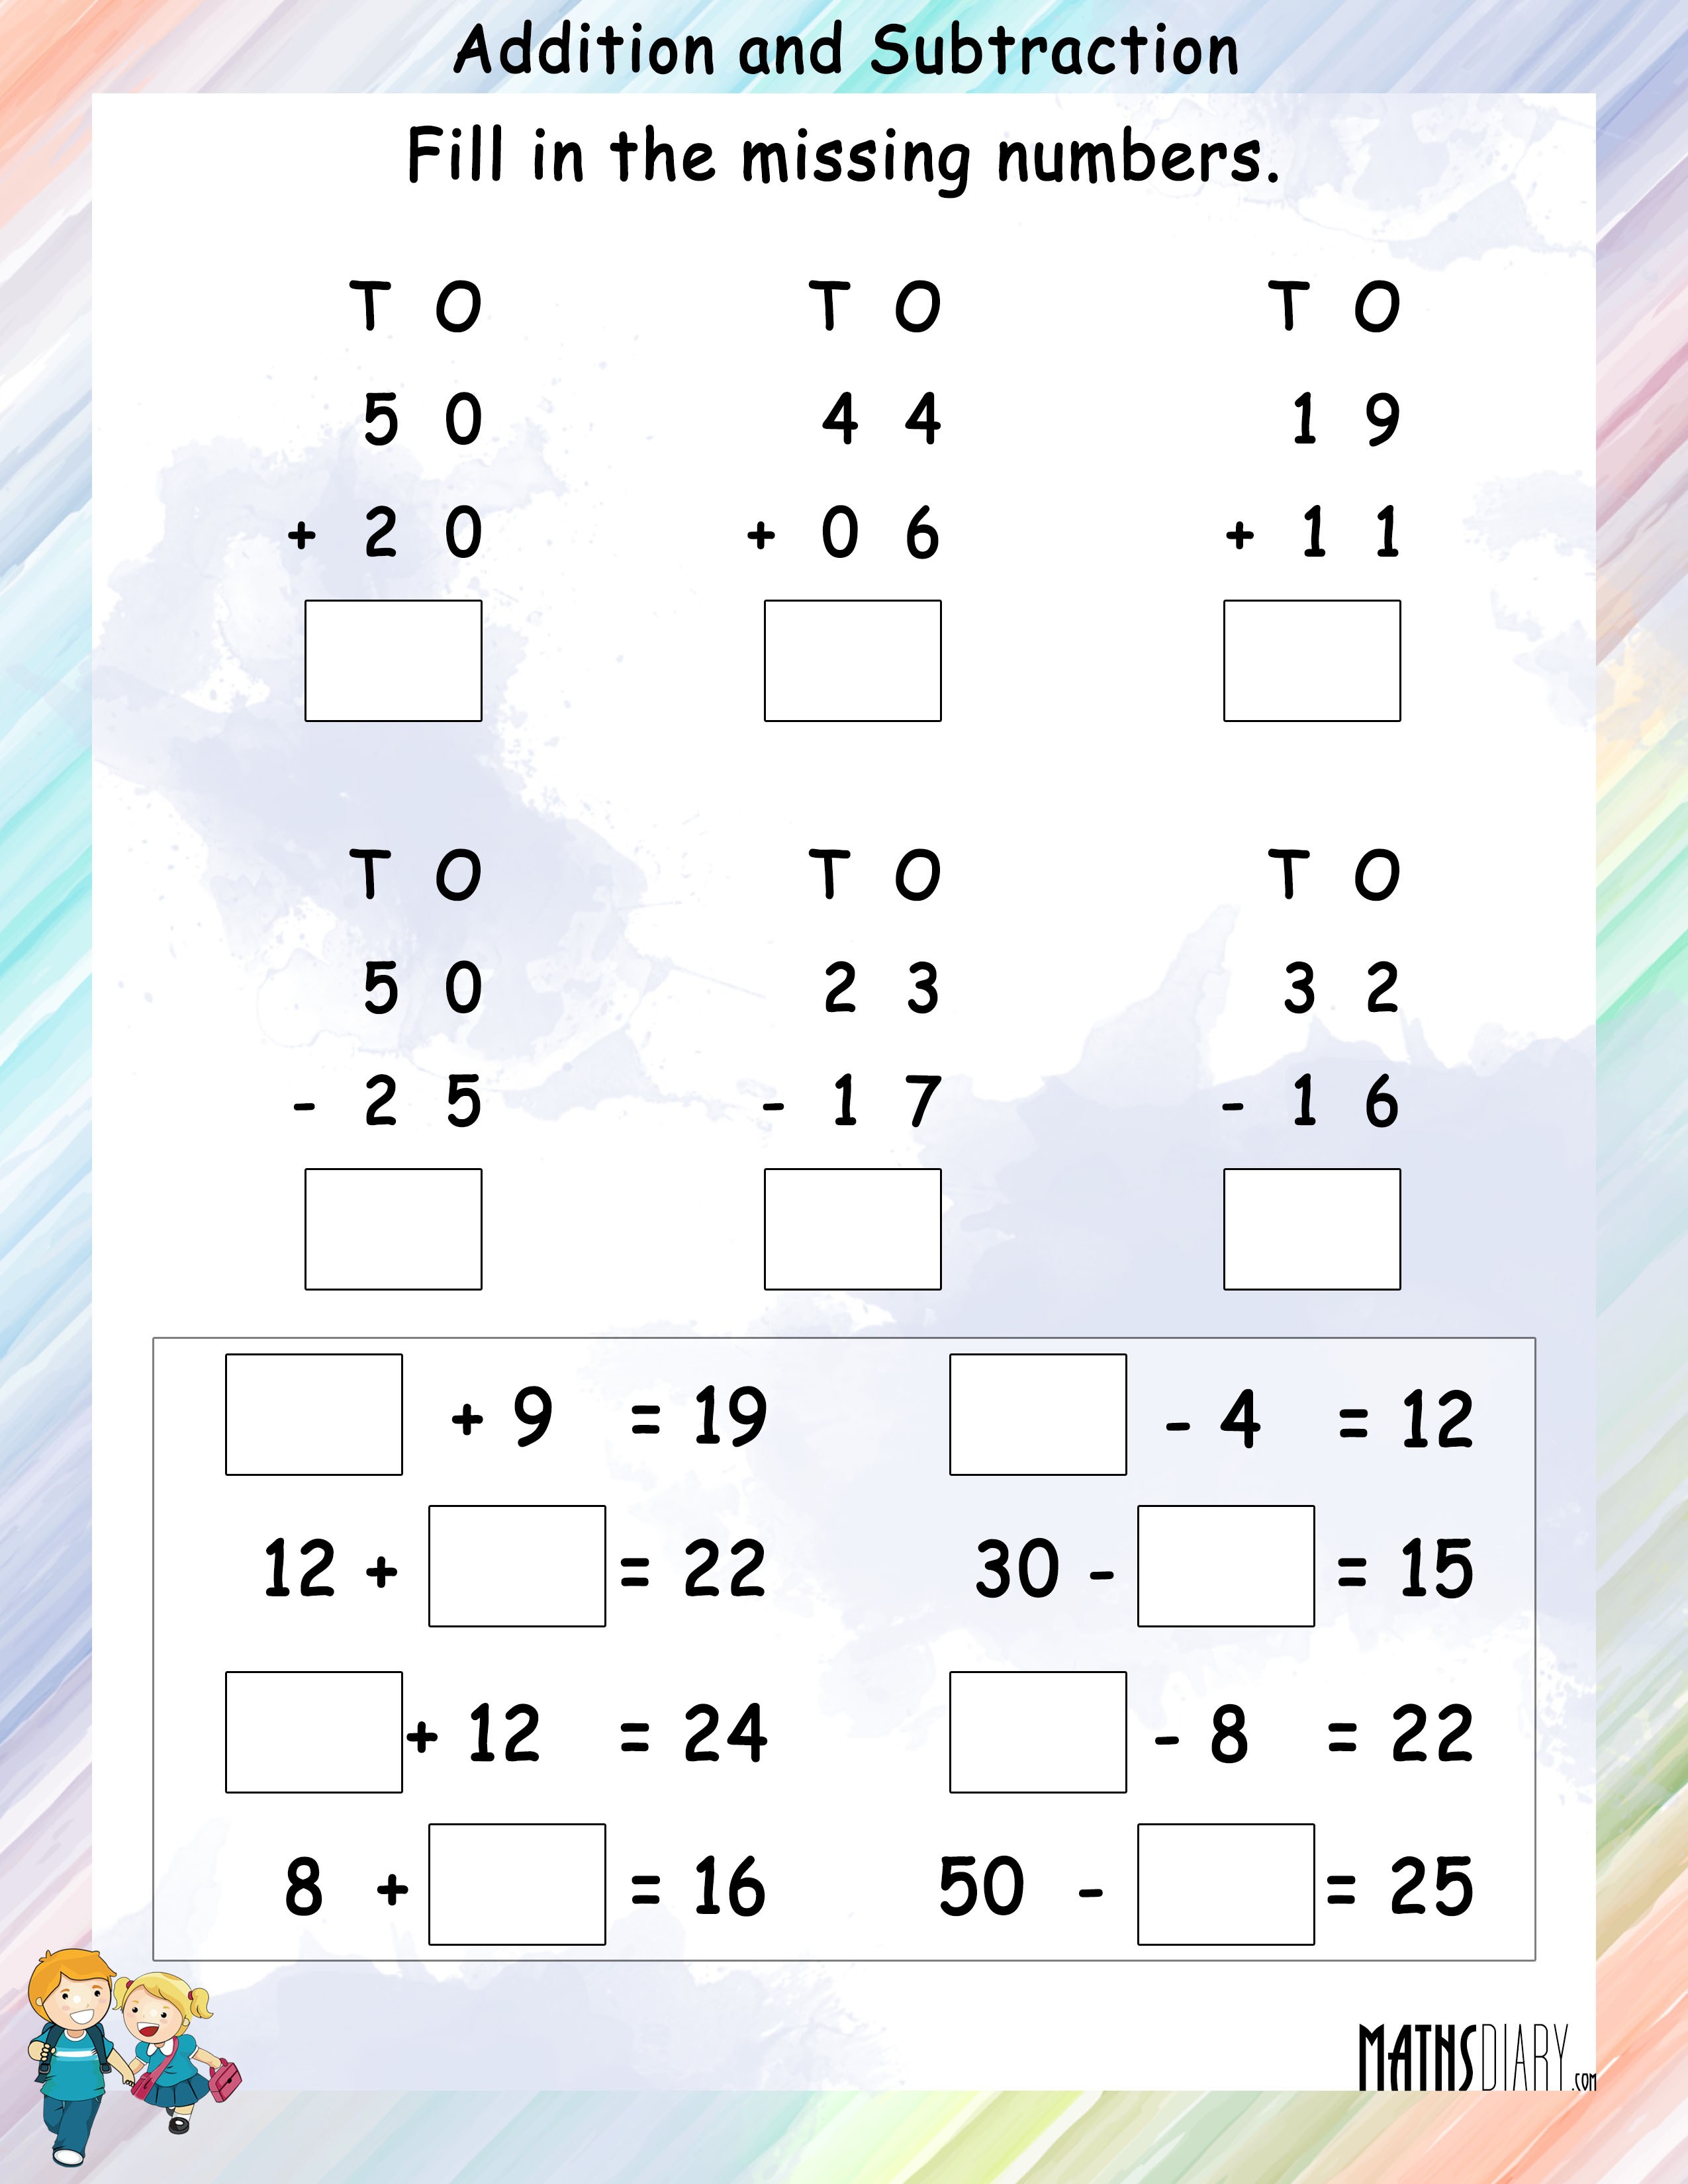 3rd-grade-addition-and-subtraction-problems-kidsworksheetfun-4-digit